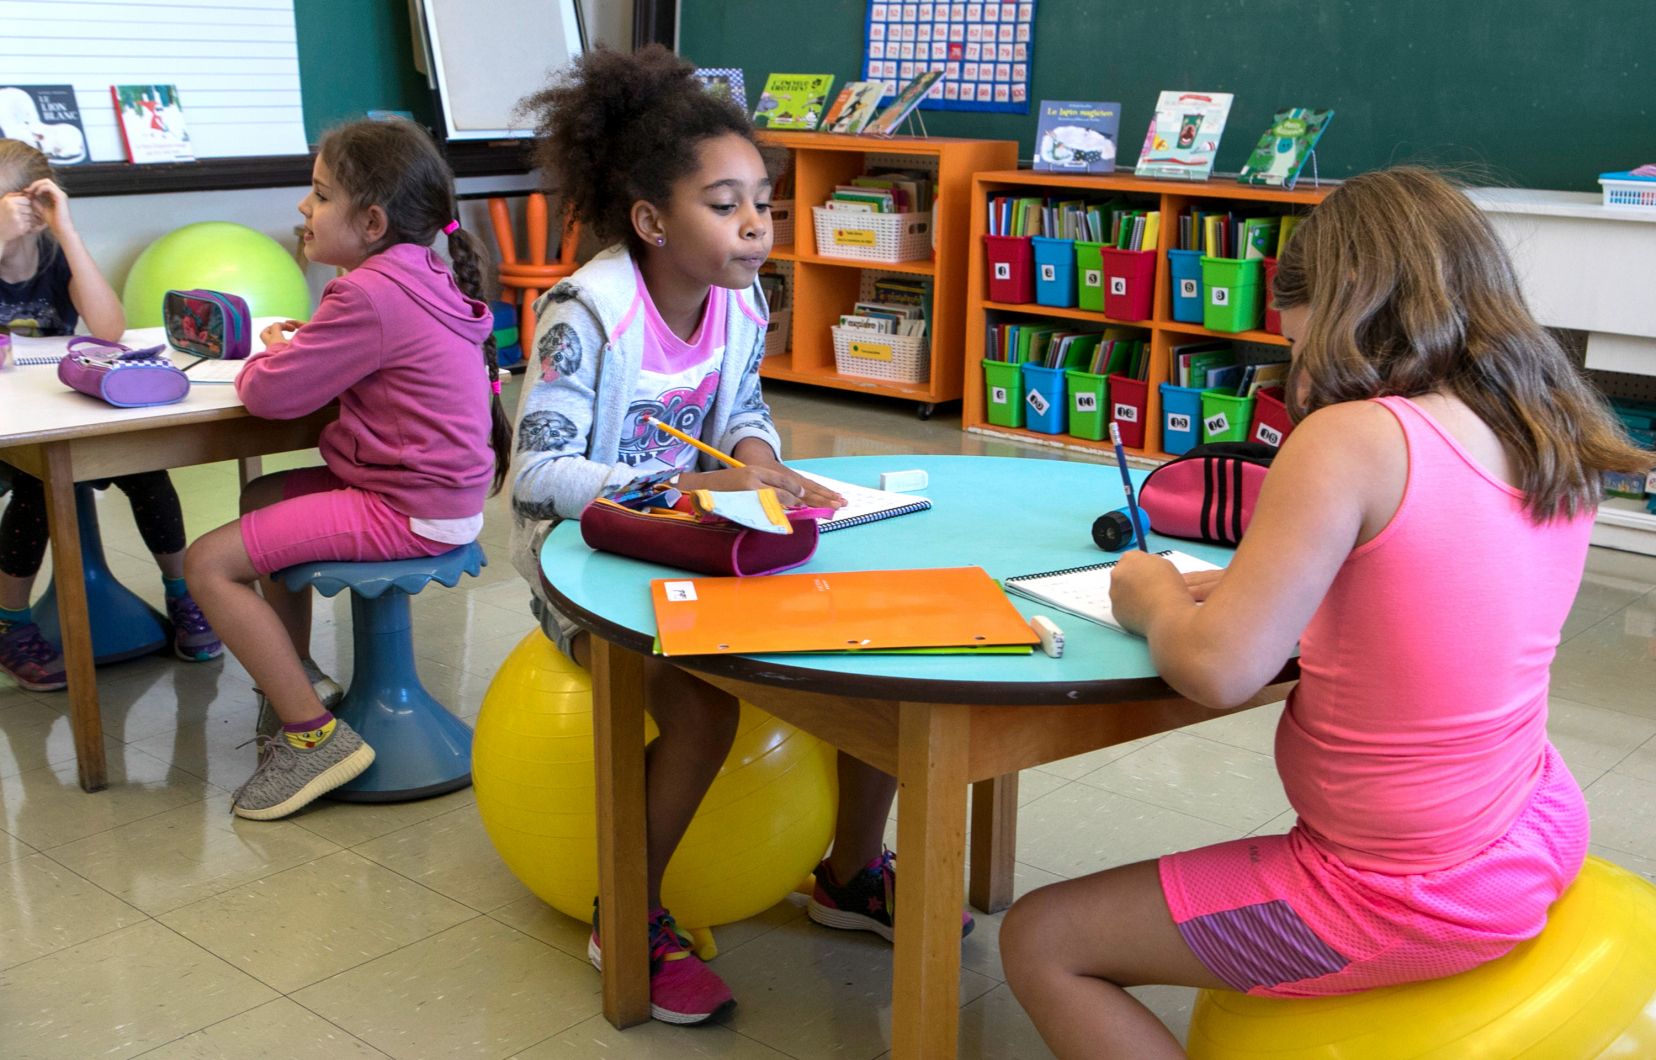 Flexible seating, a new trend in teaching